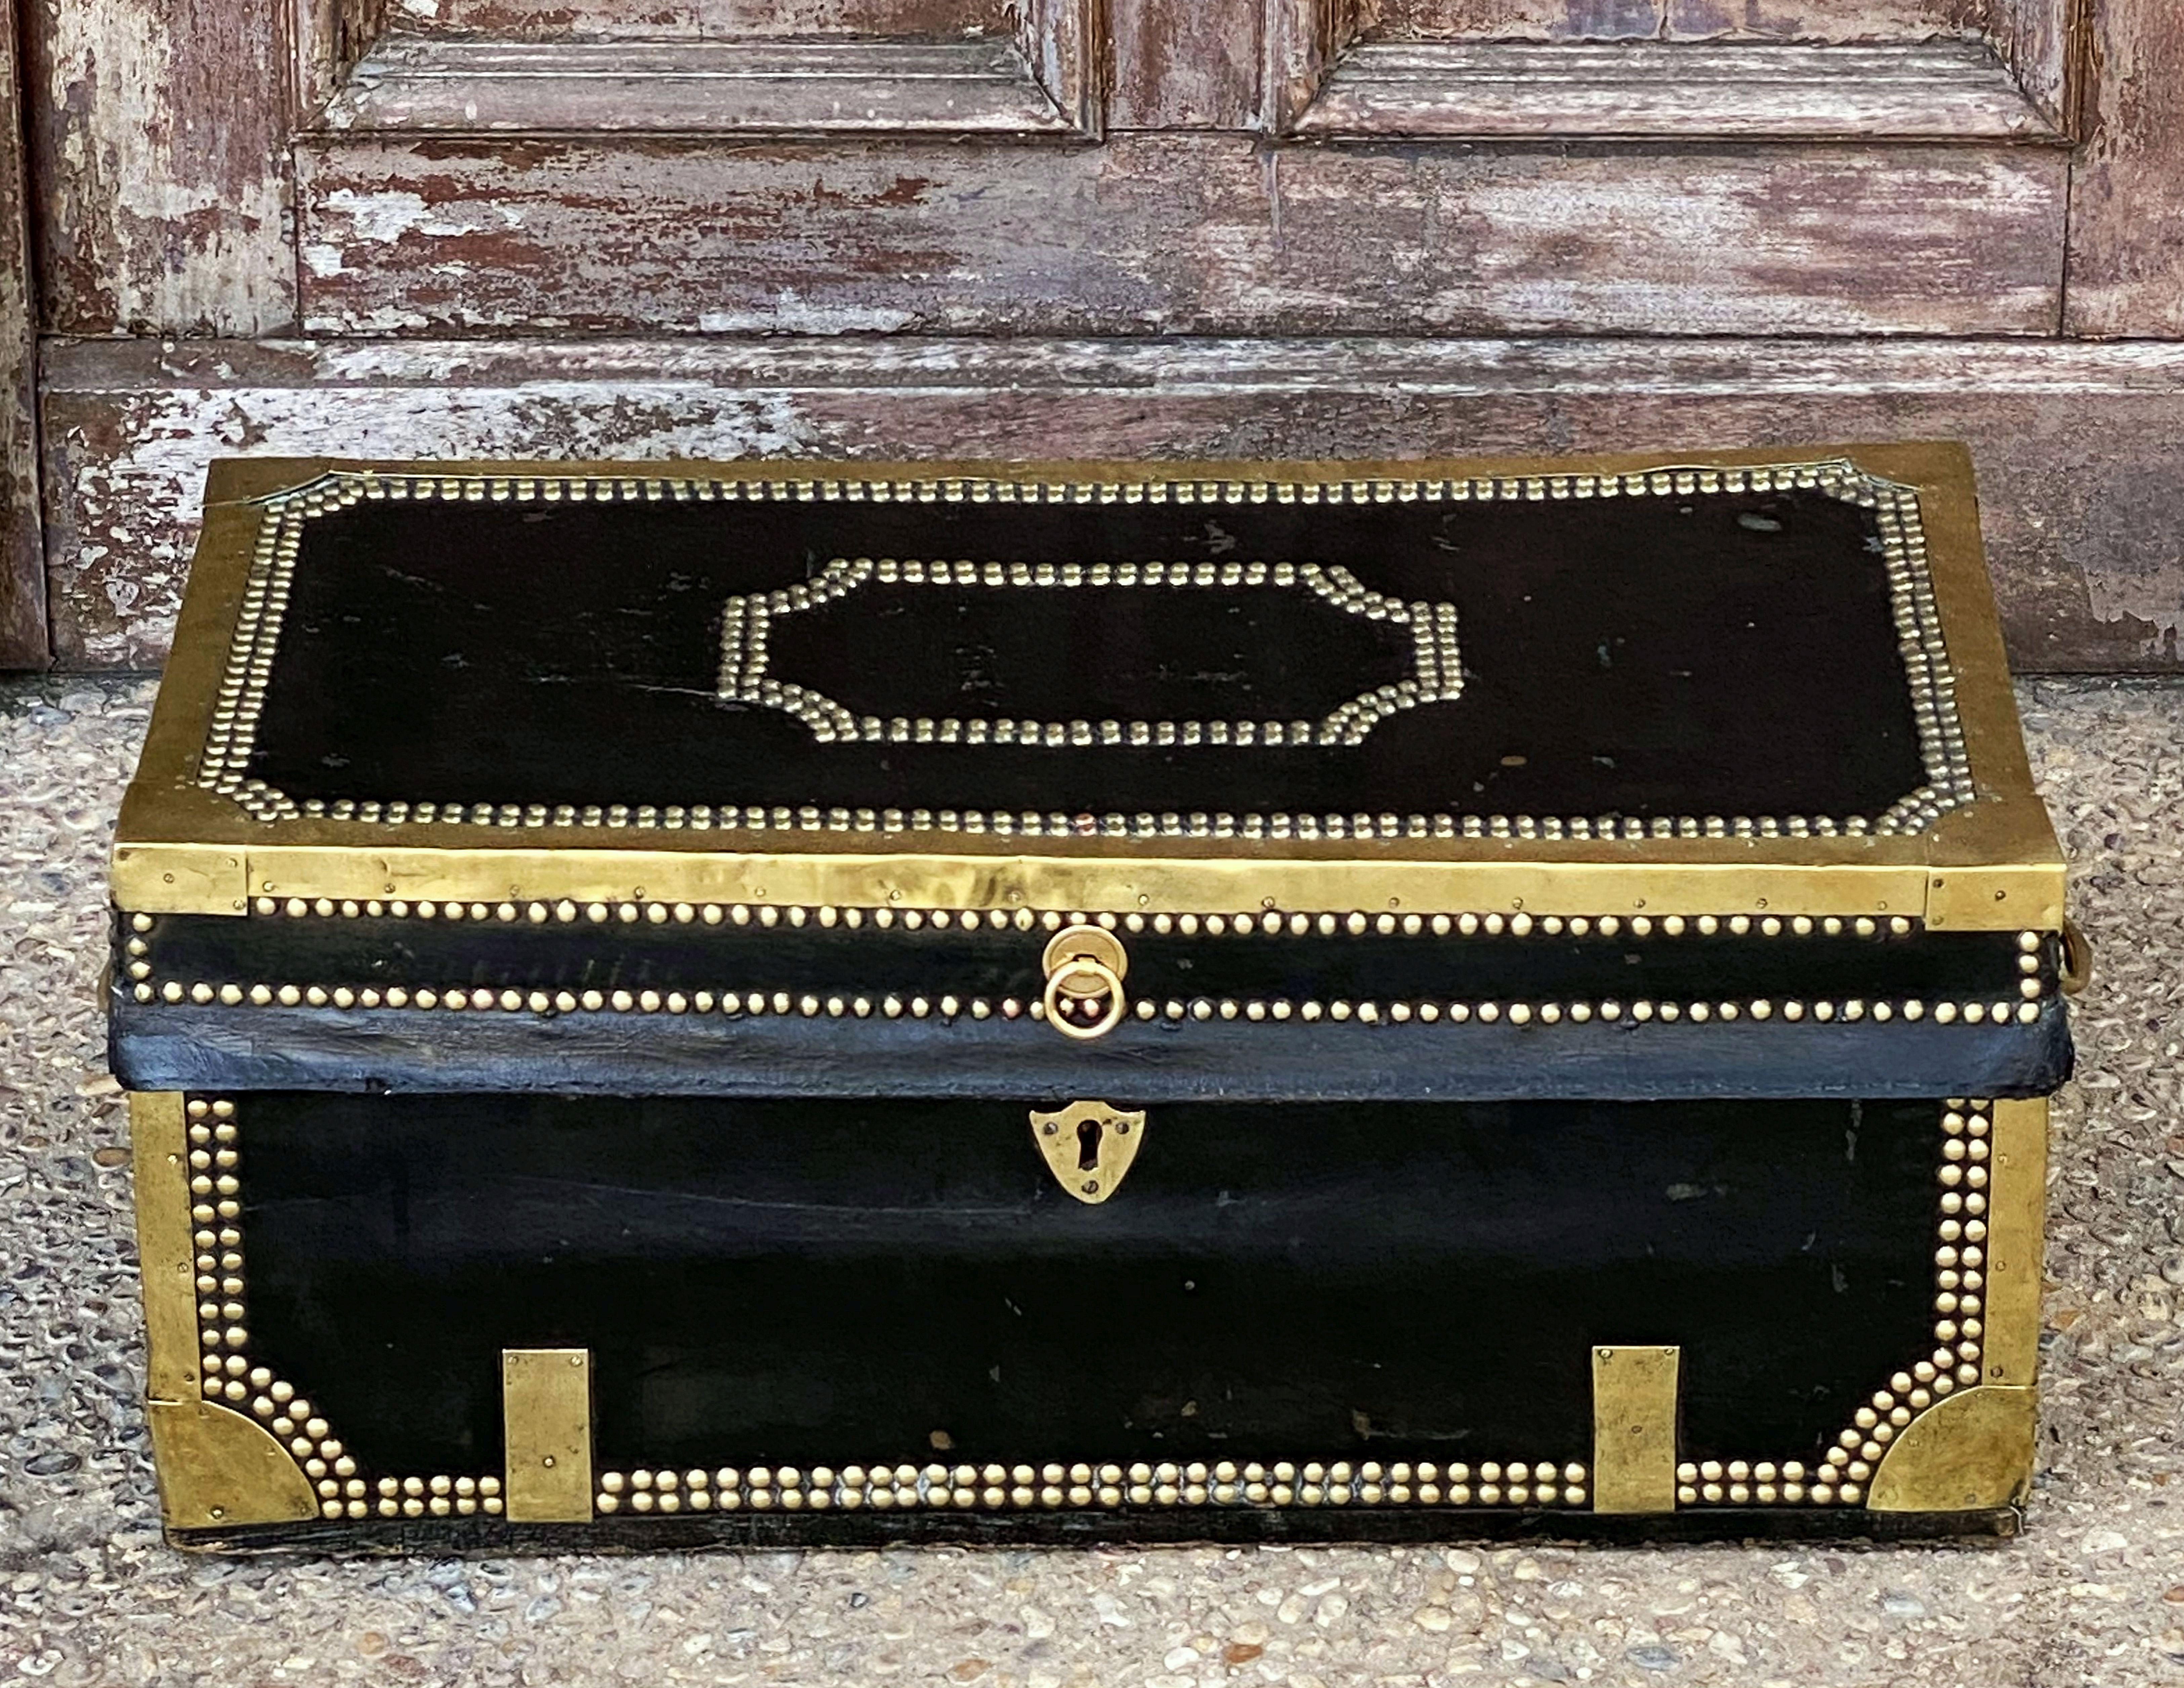 A handsome small-sized British officer's military Campaign camphor trunk or chest of brass-bound and studded leather over camphor wood, circa 1820. 
Manufactured by the British East India Company for an officer to carry his kit on Campaign.
With